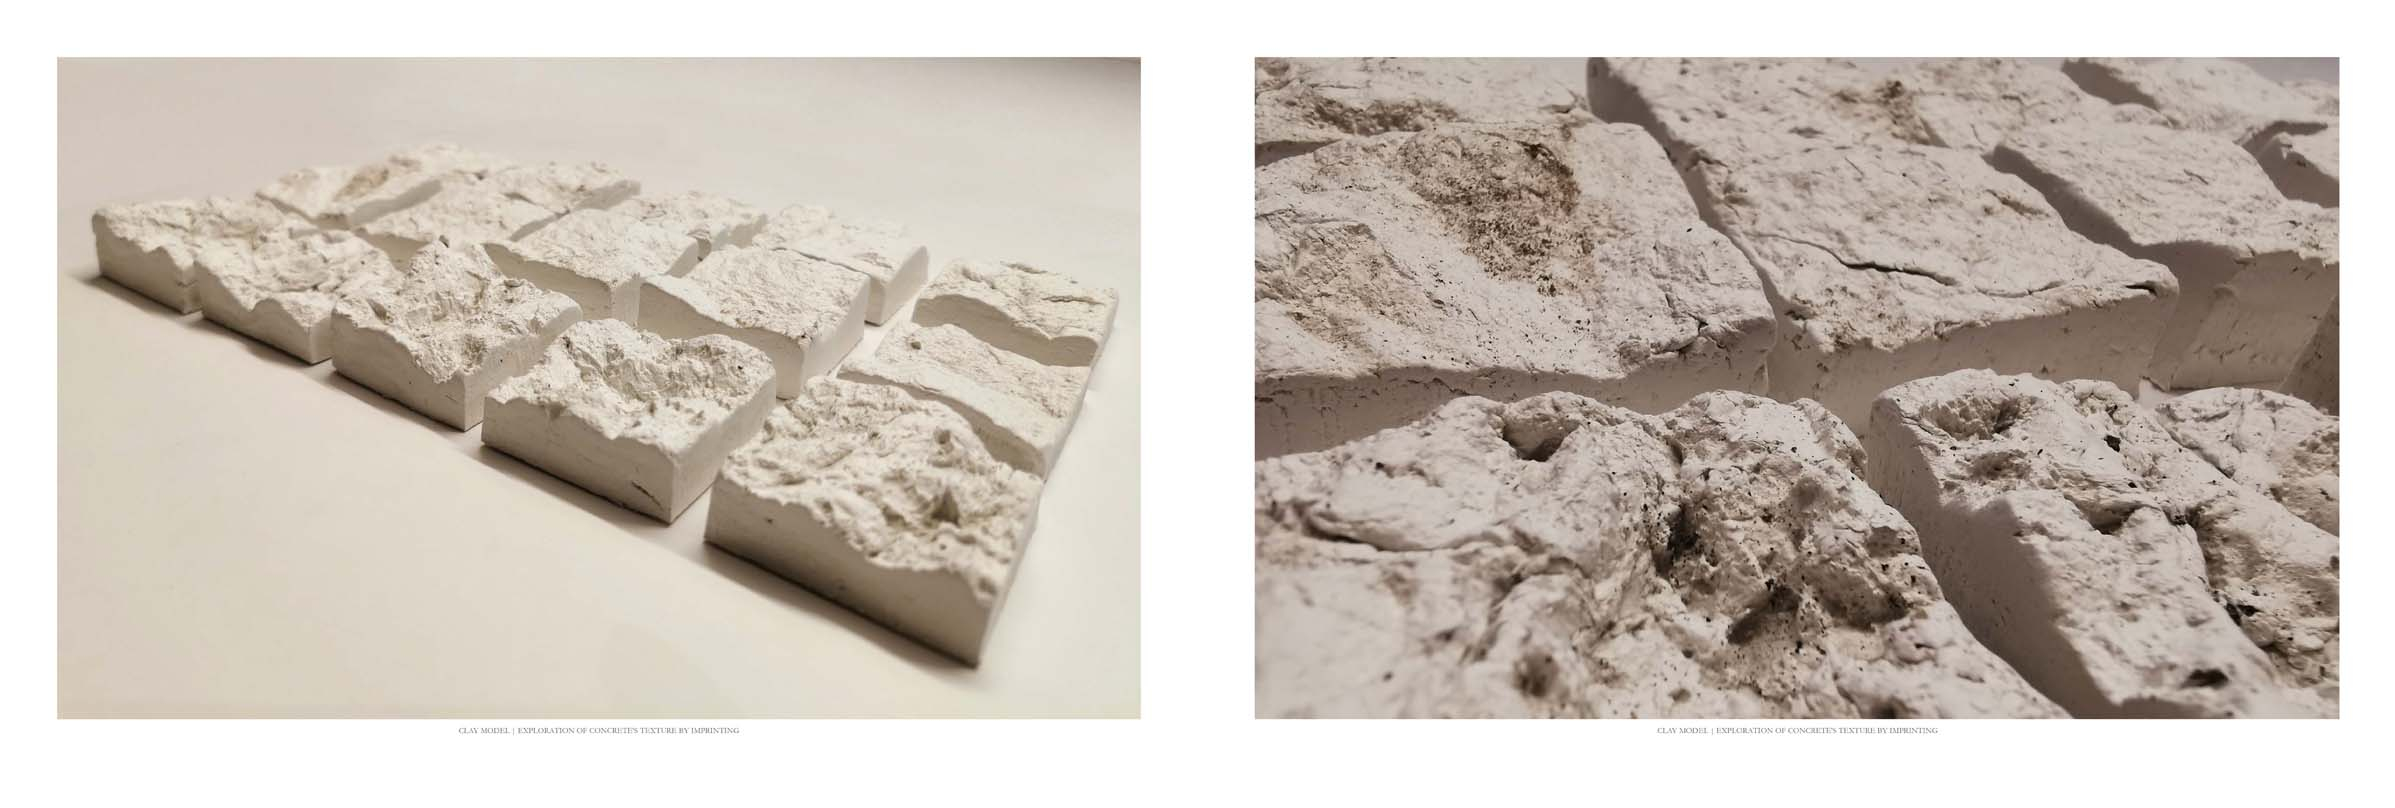 CLAY MODEL | EXPLORATION OF CONCRETE'S TEXTURE BY IMPRINTING